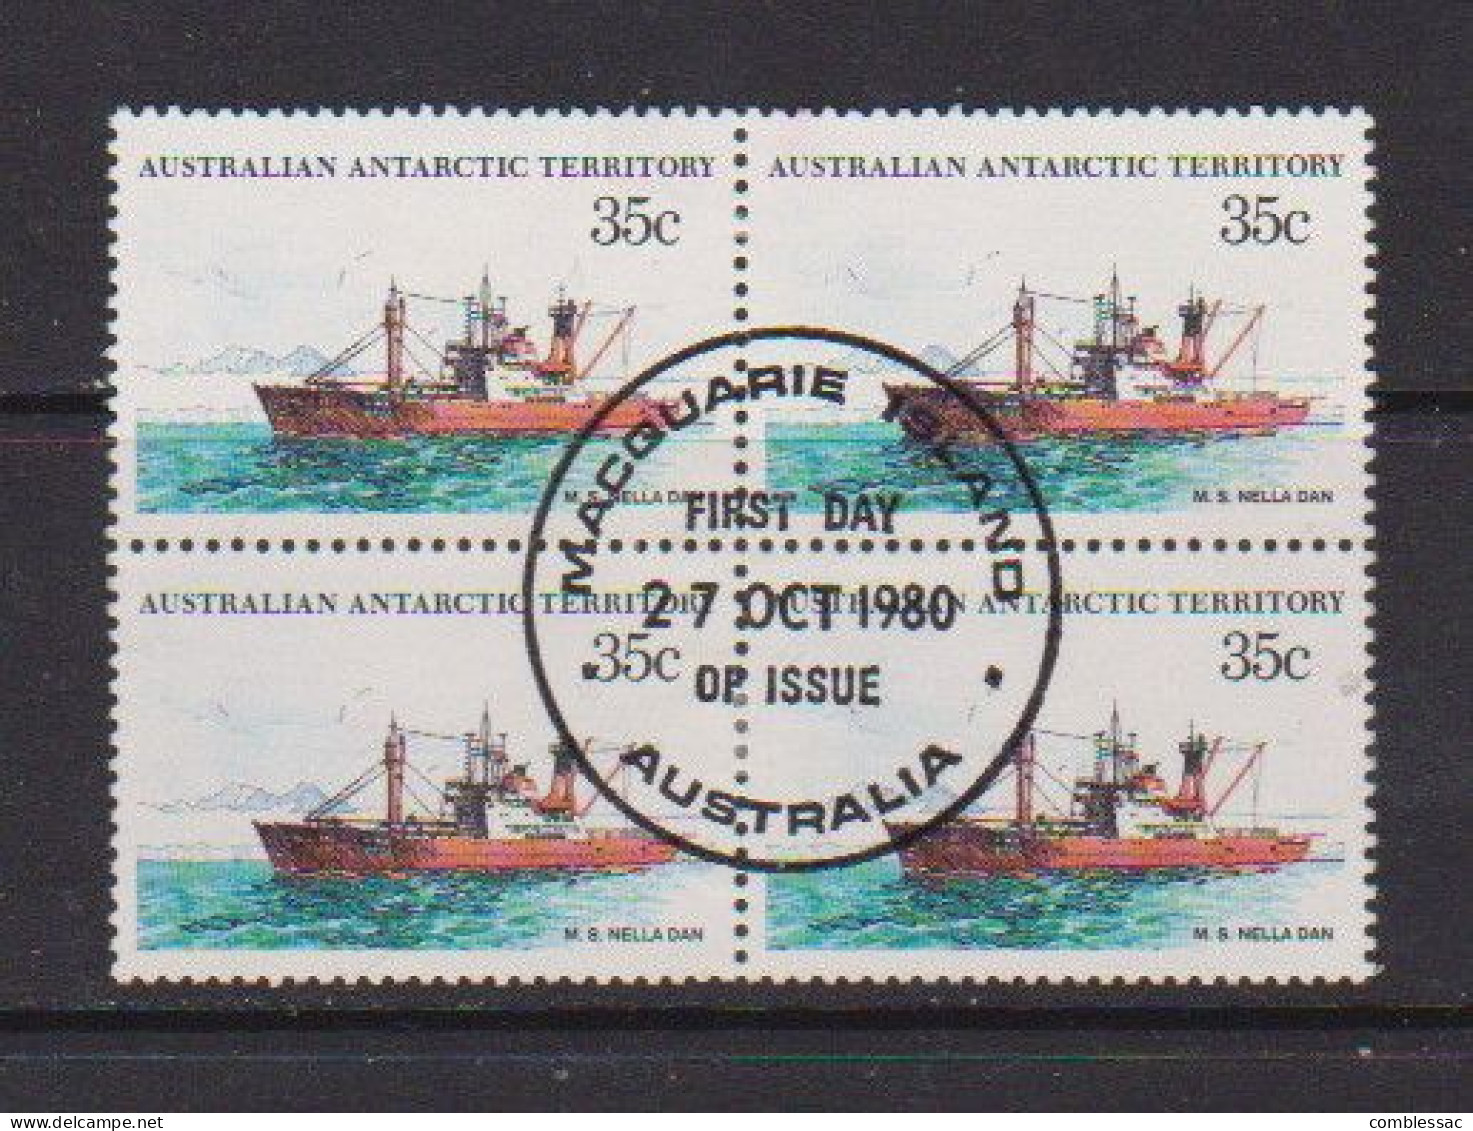 AUSTRALIAN  ANTARCTIC  TERRITORY    1980  Ships  35c  Block  Of  4  Post Marked  Firct  Day  Of  Issue  27th Oct  1980 - Usati